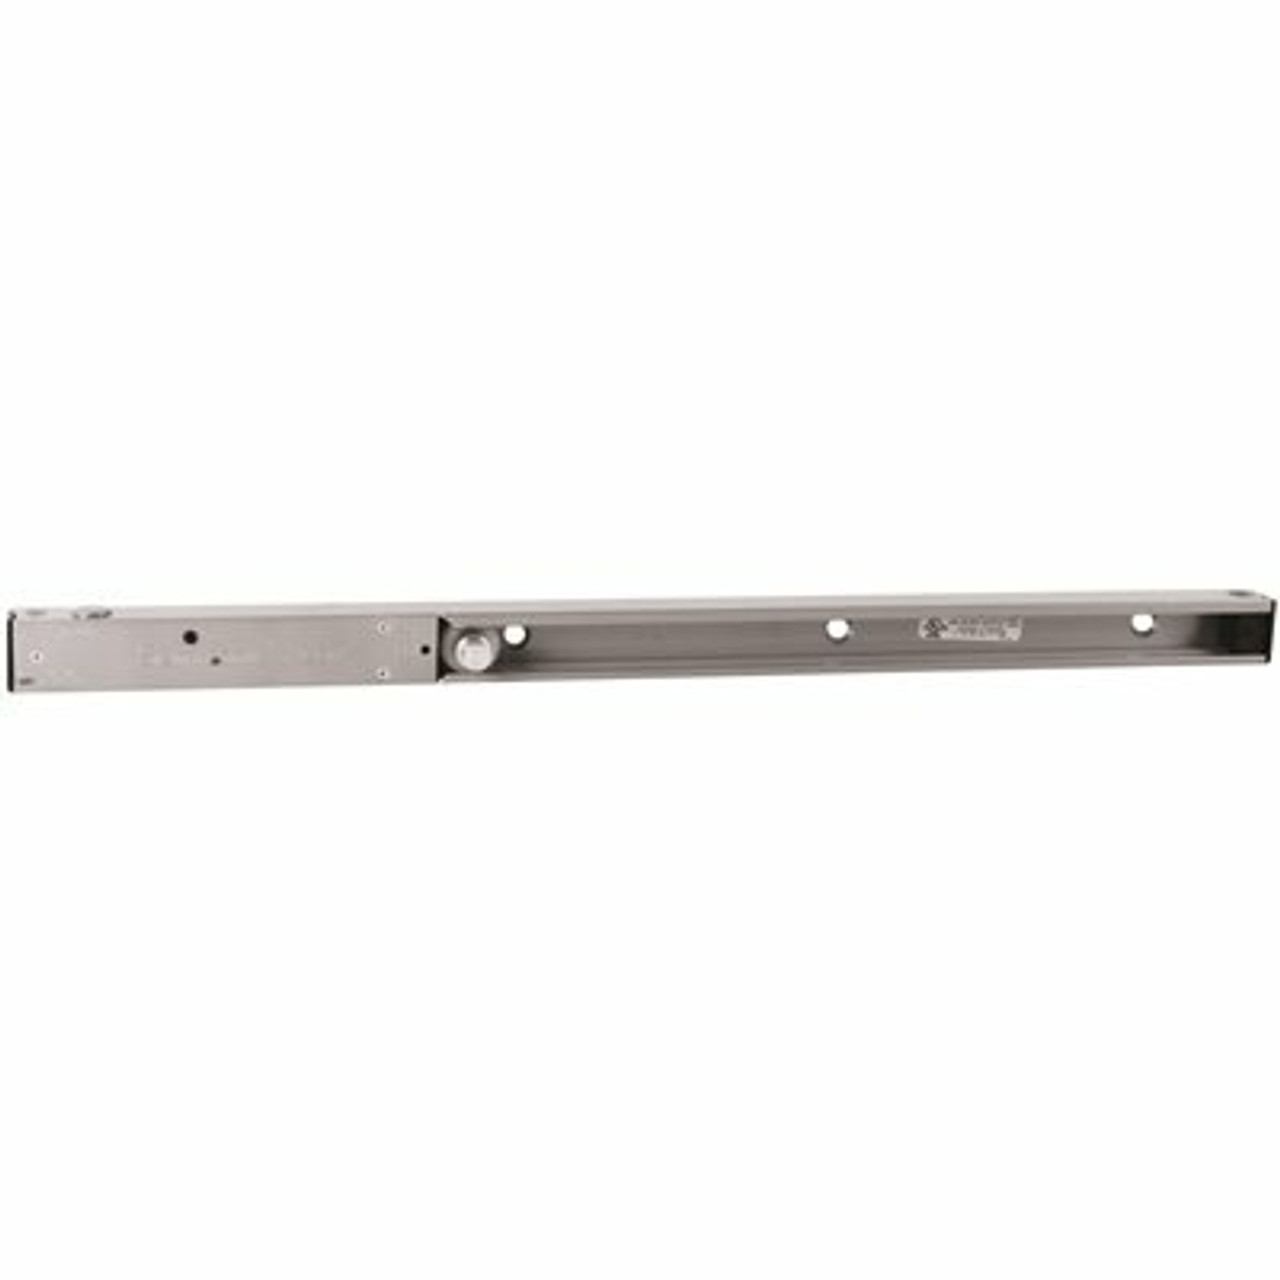 Lcn 4040Se Series Size 1 To 4 Sprayed Aluminum Grade 1 Surface Door Closer, Single Point Hold Open Arm, Non-Handed - 313257891